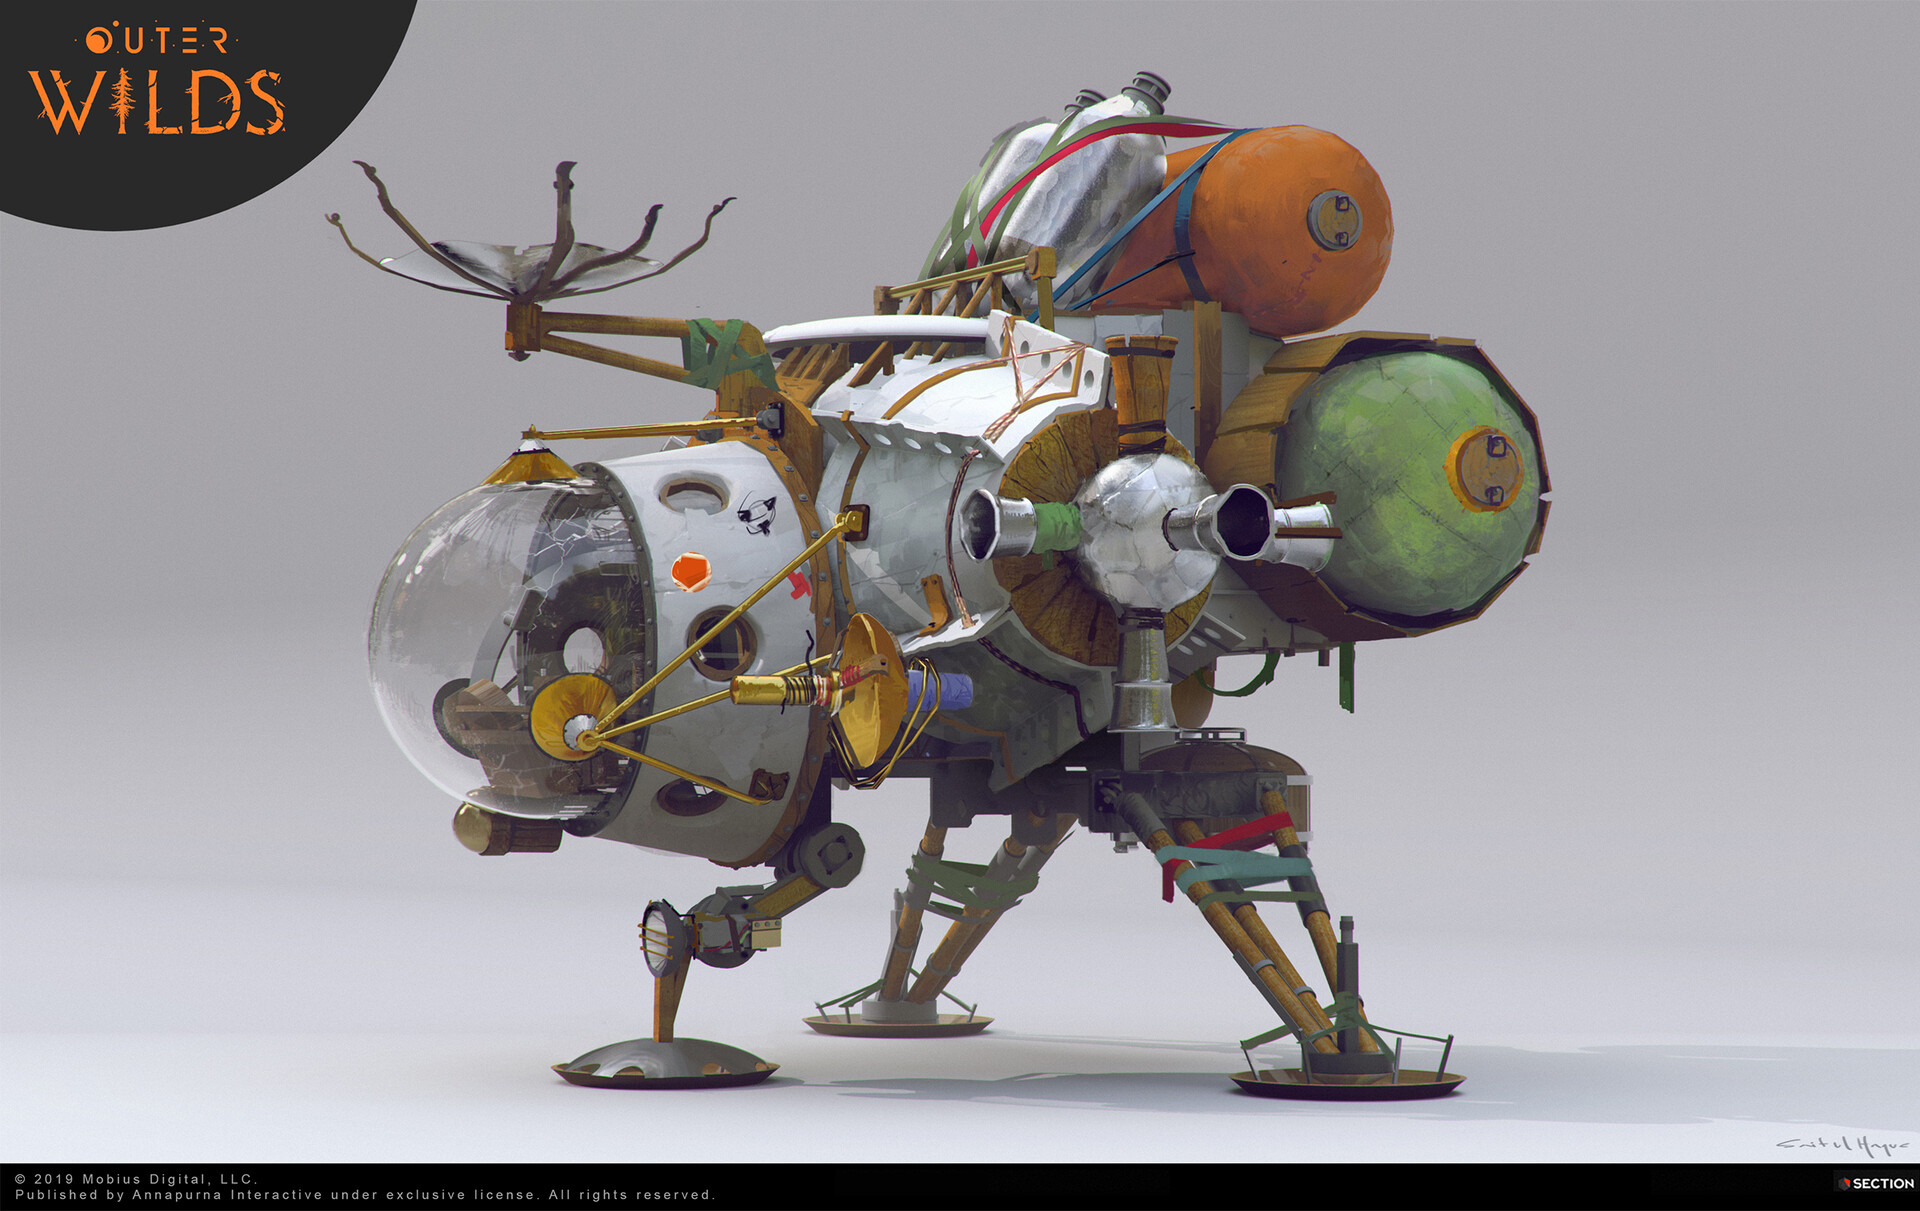 Your Space Ship, concept art design for Outer Wilds by Saiful Haque : outerwilds